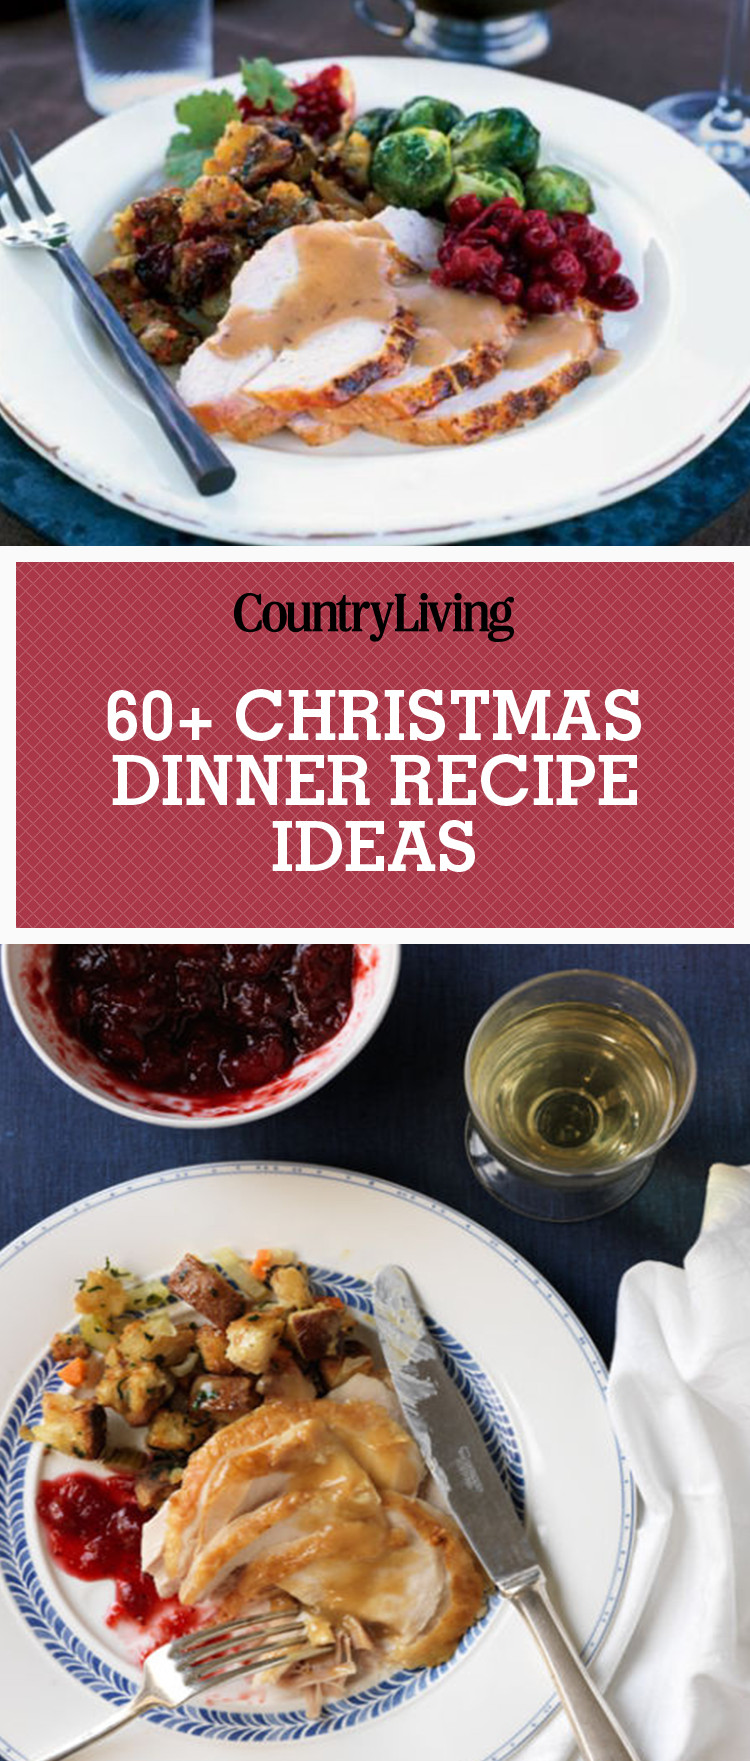 Christmas Dinner Suggestions
 70 Easy Christmas Dinner Ideas Best Holiday Meal Recipes